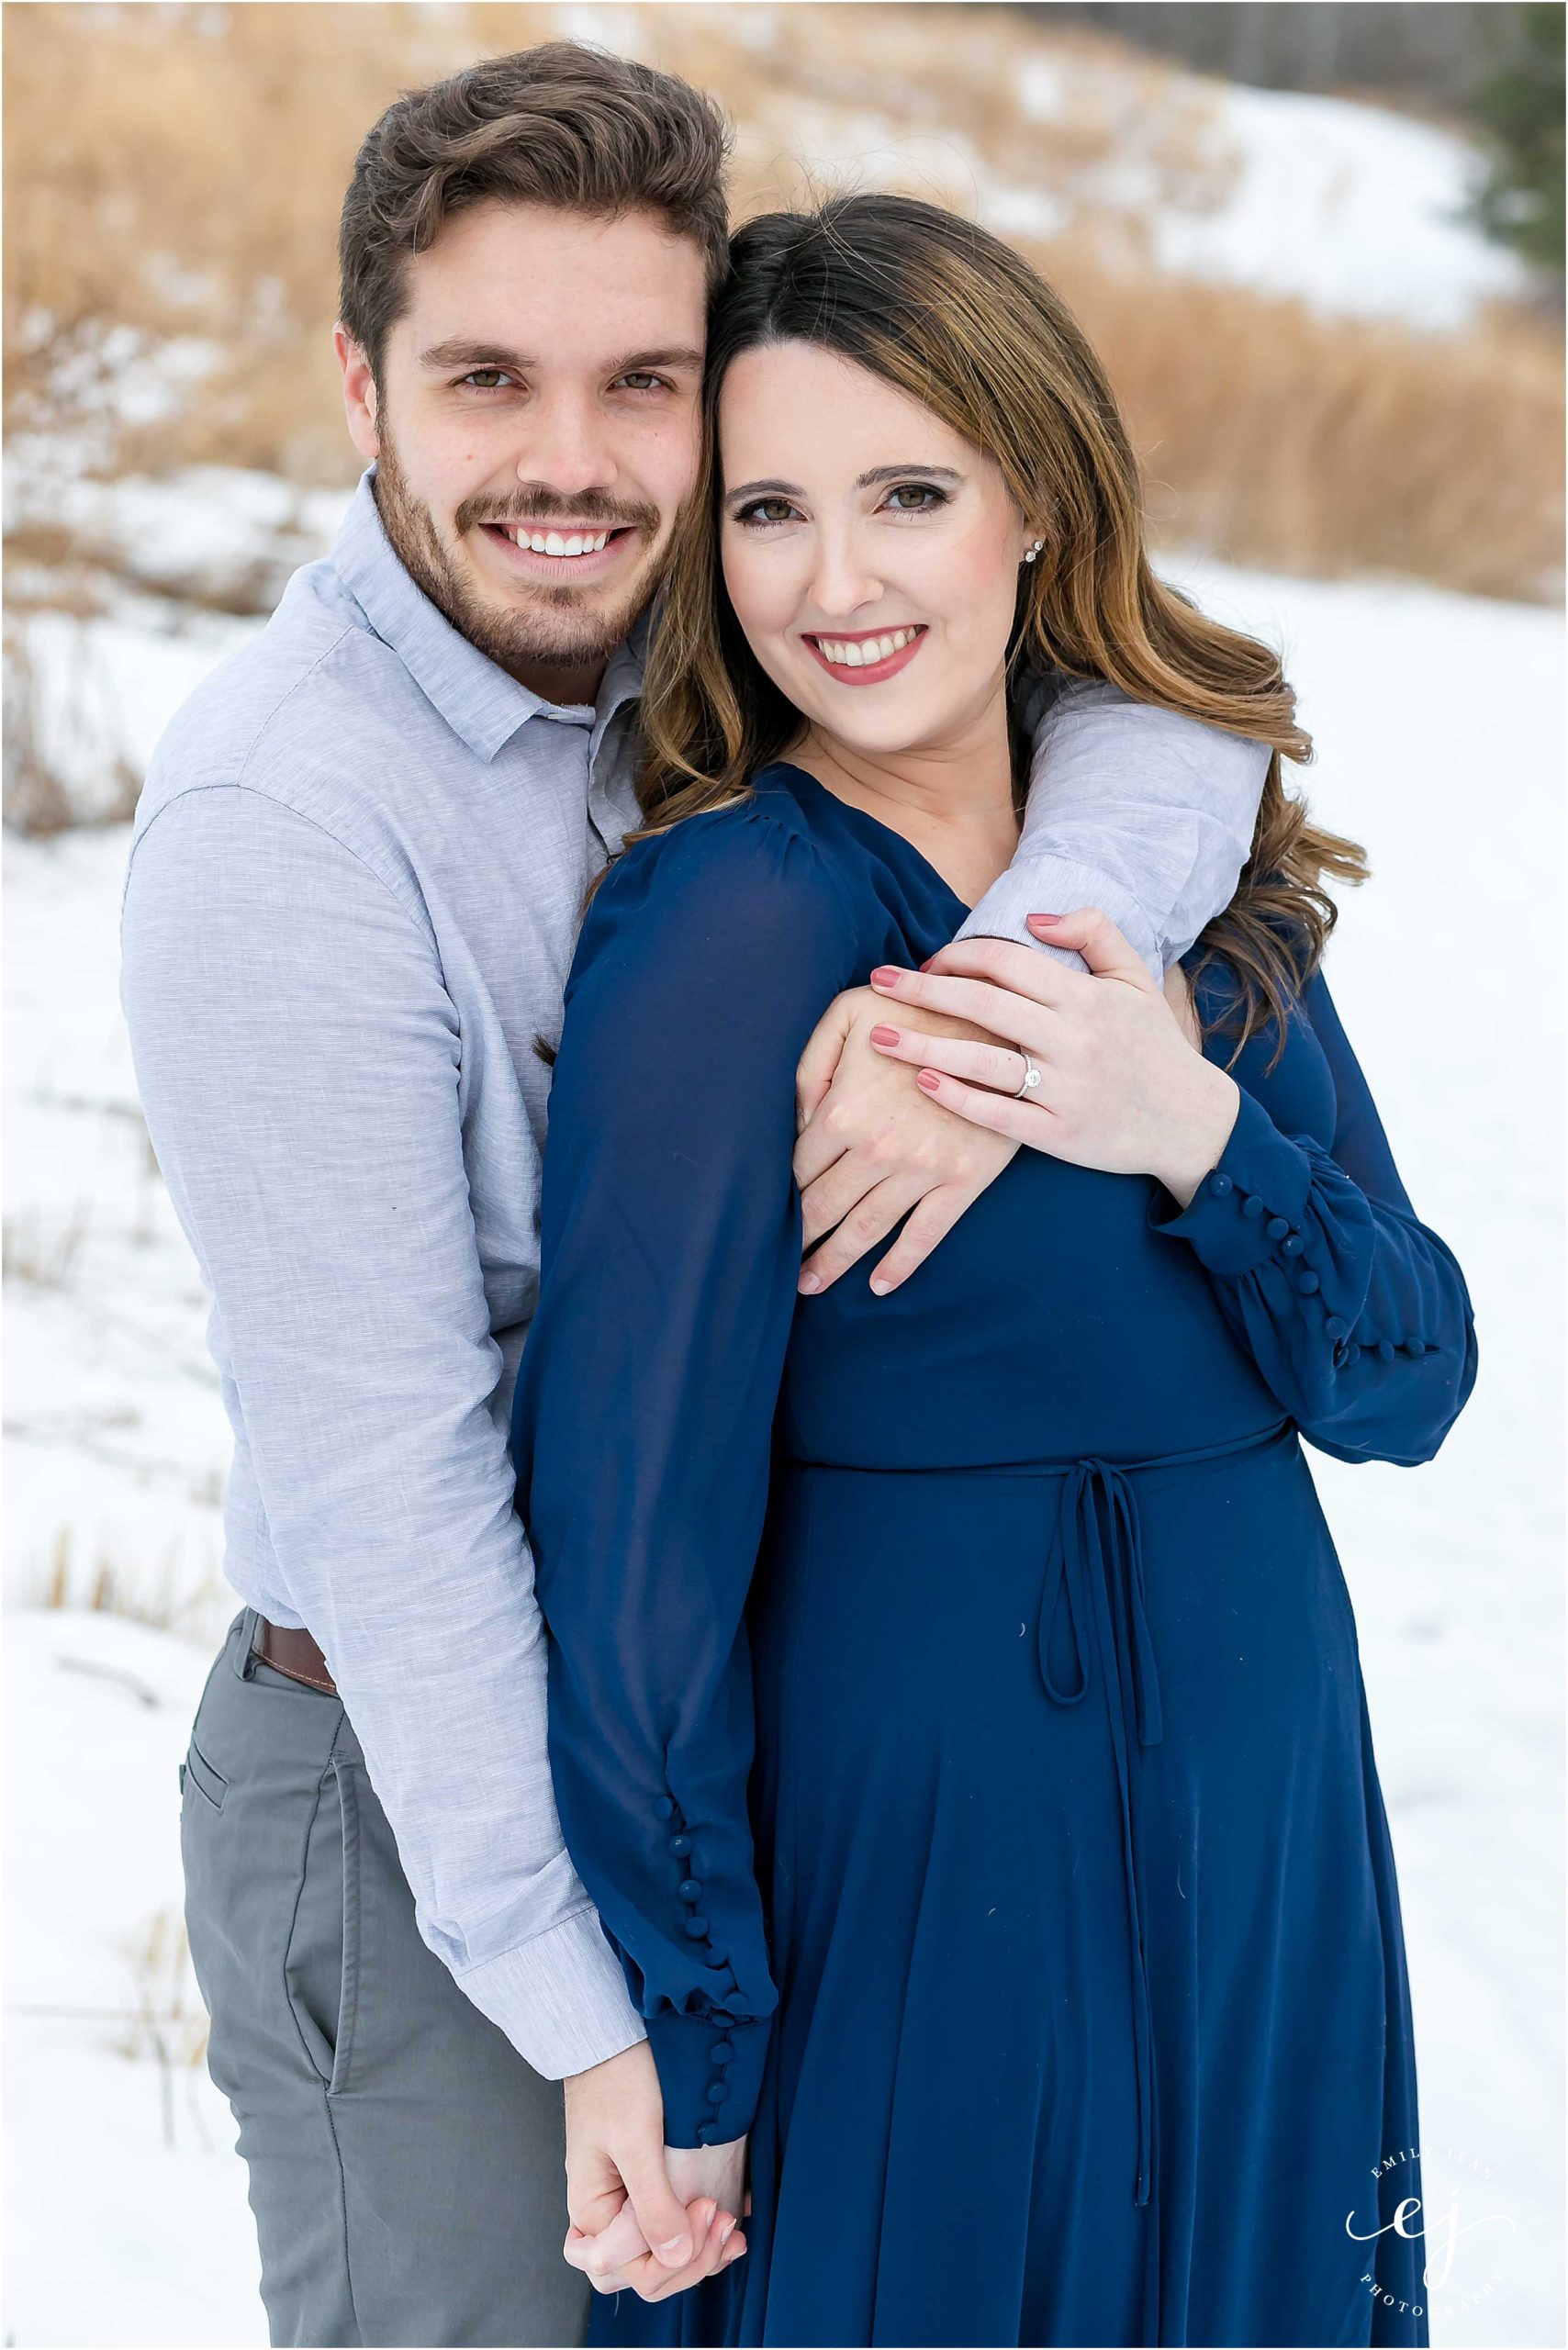 couple smiling at camera engagement photo wintertime in la crosse wisconsin rim of the city